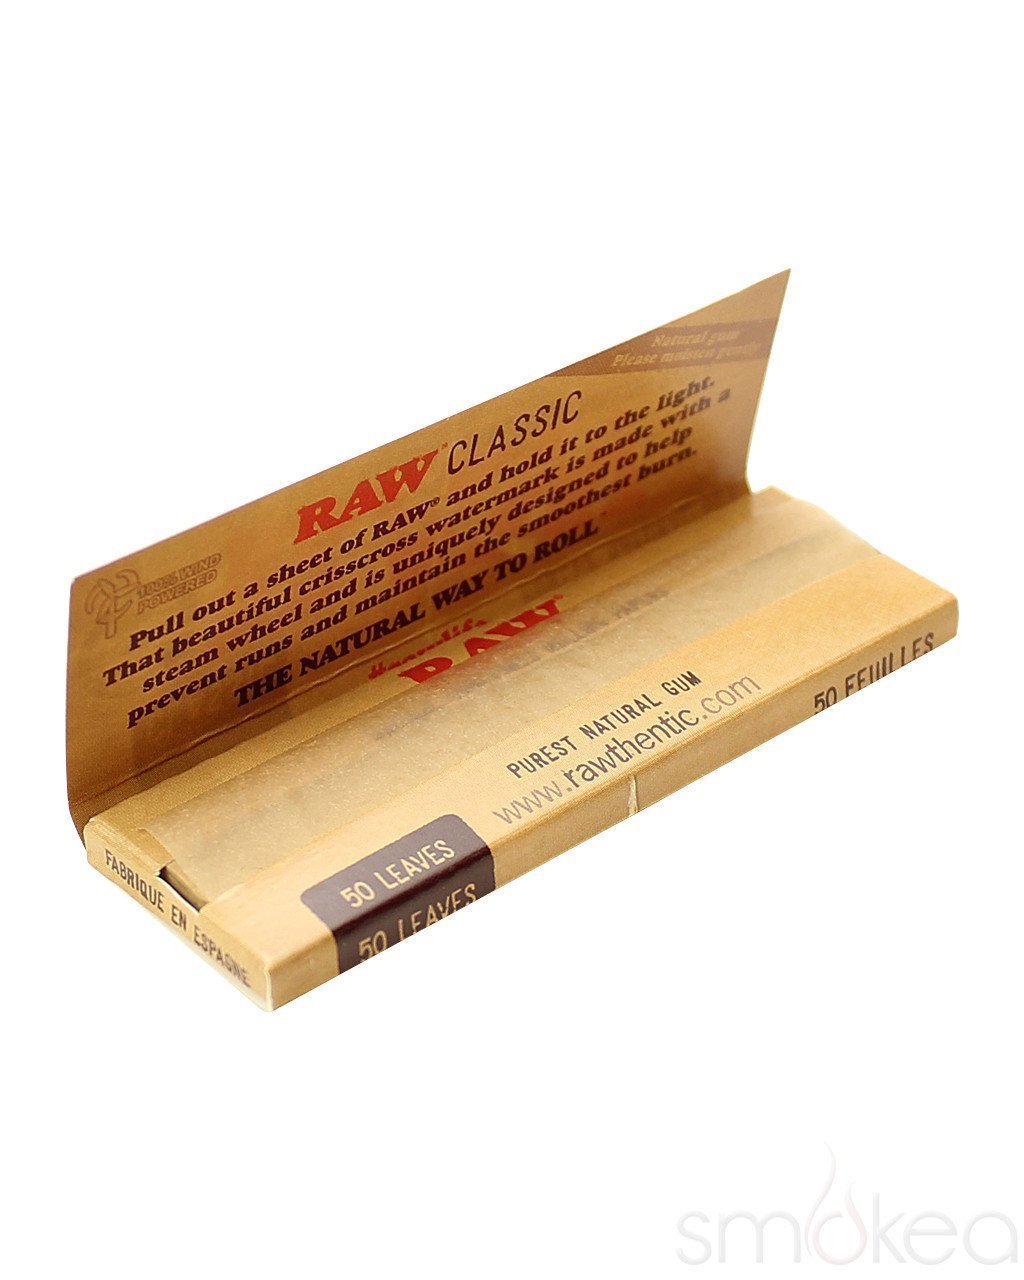 Raw Classic 1 1/4 Size Brown Rolling Paper (Full Box)